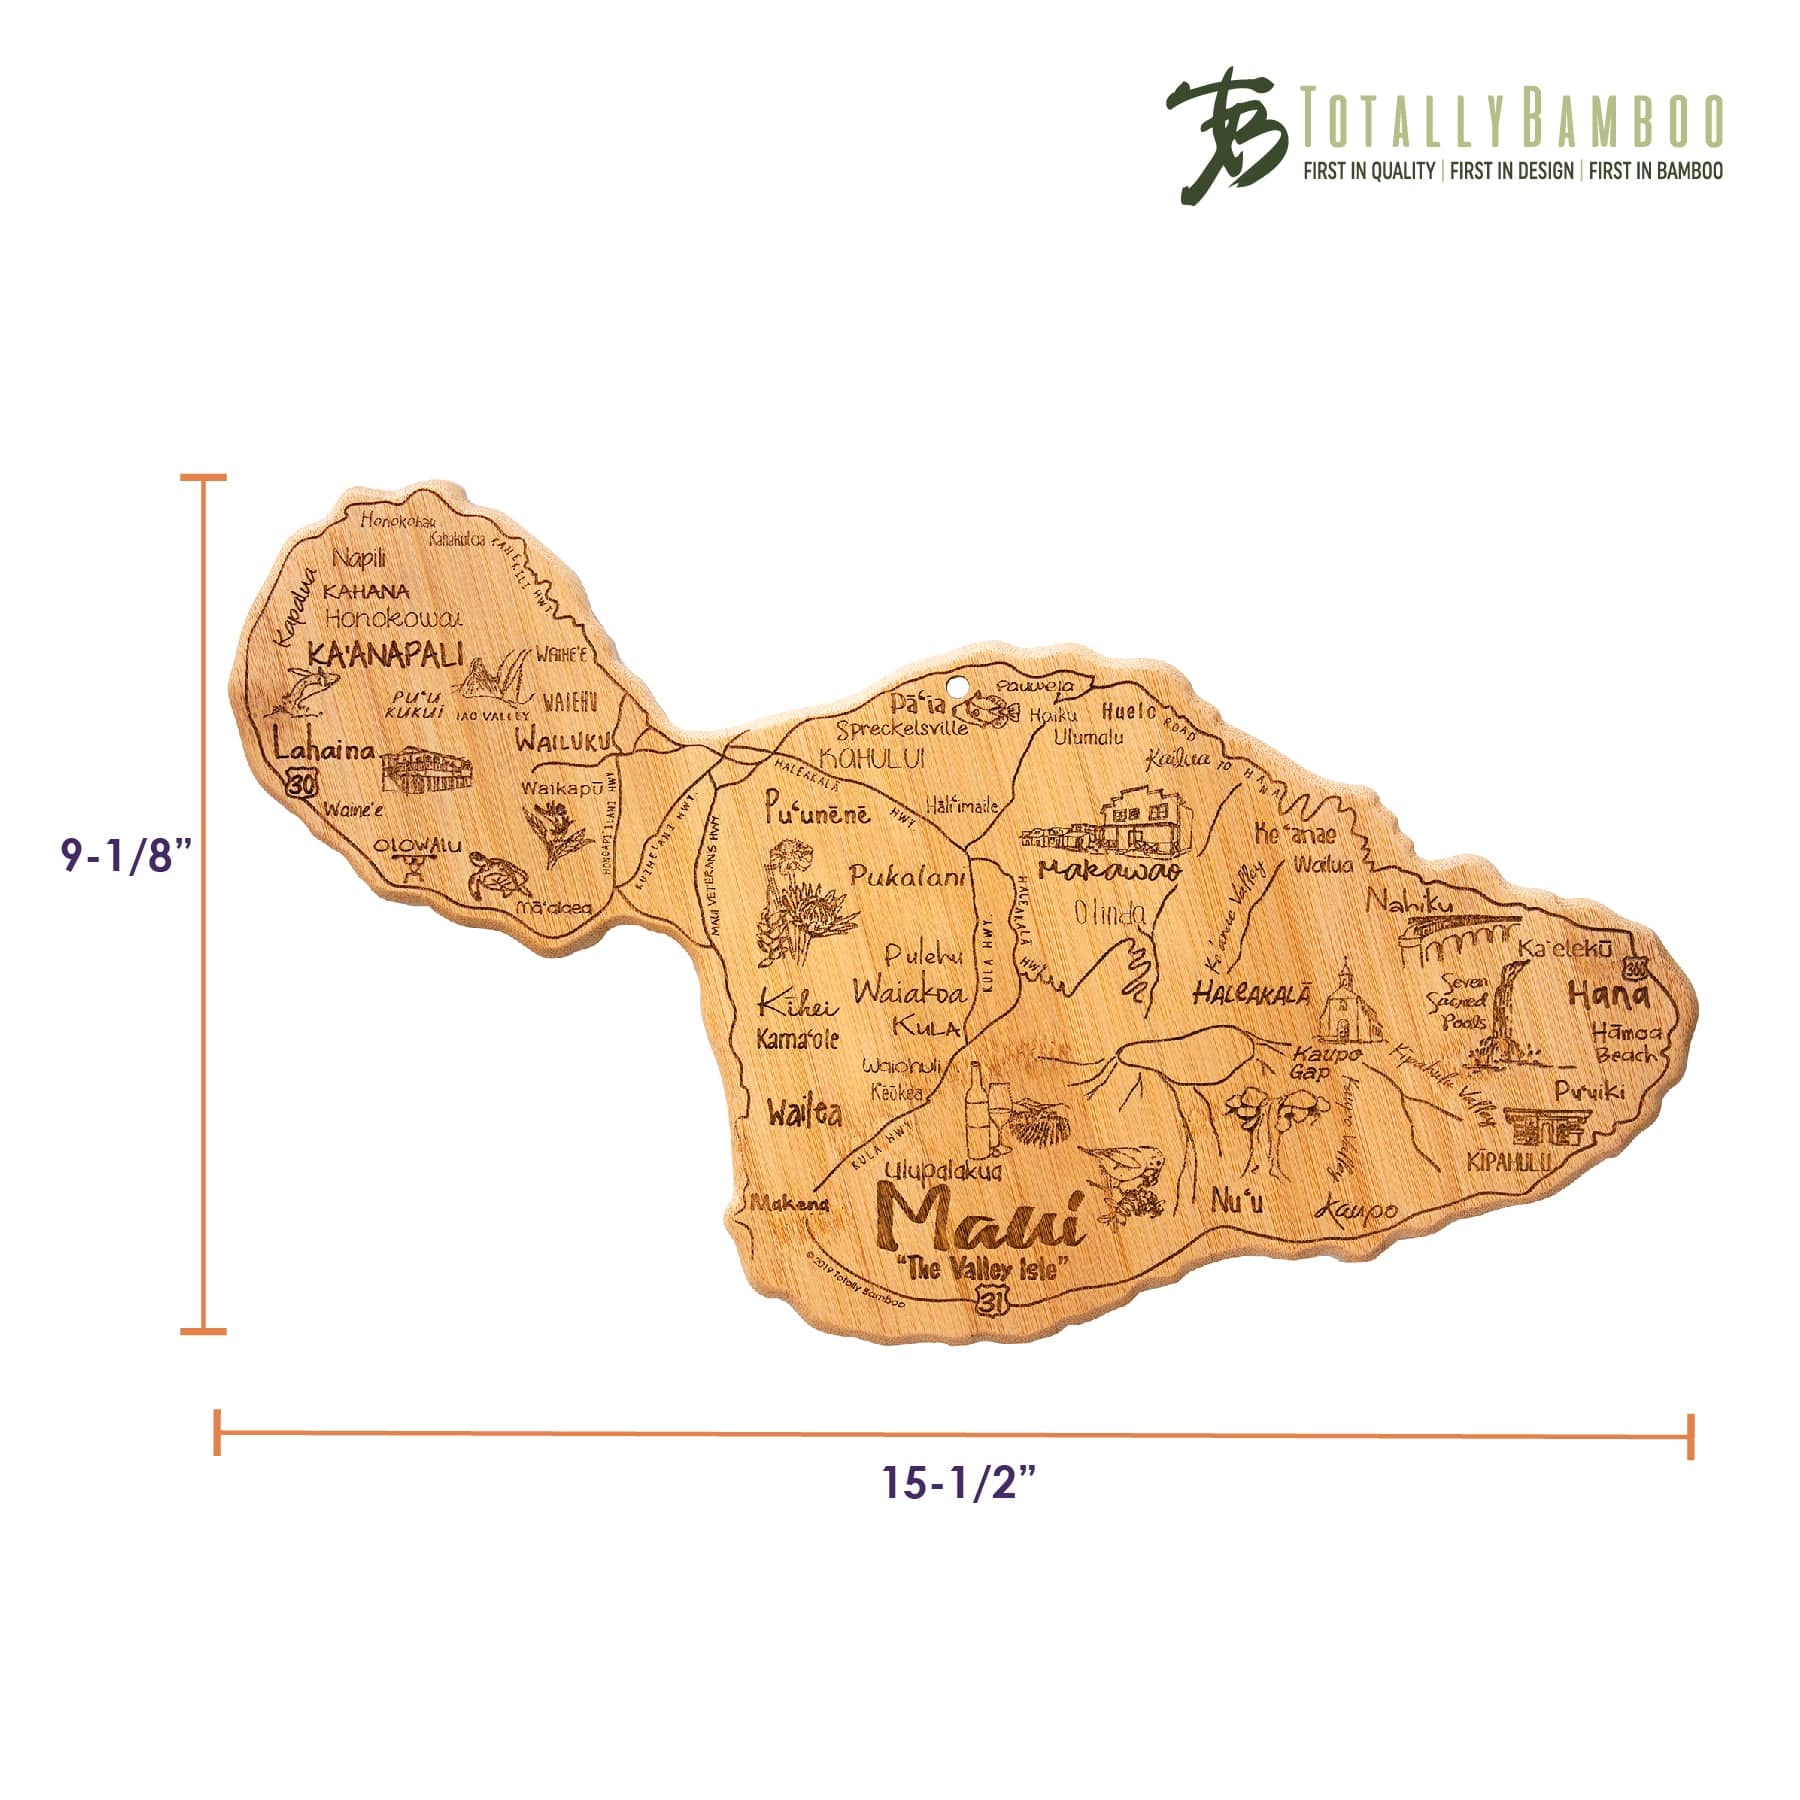 Totally Bamboo Destination Maui Island Bamboo Serving and Cutting Board